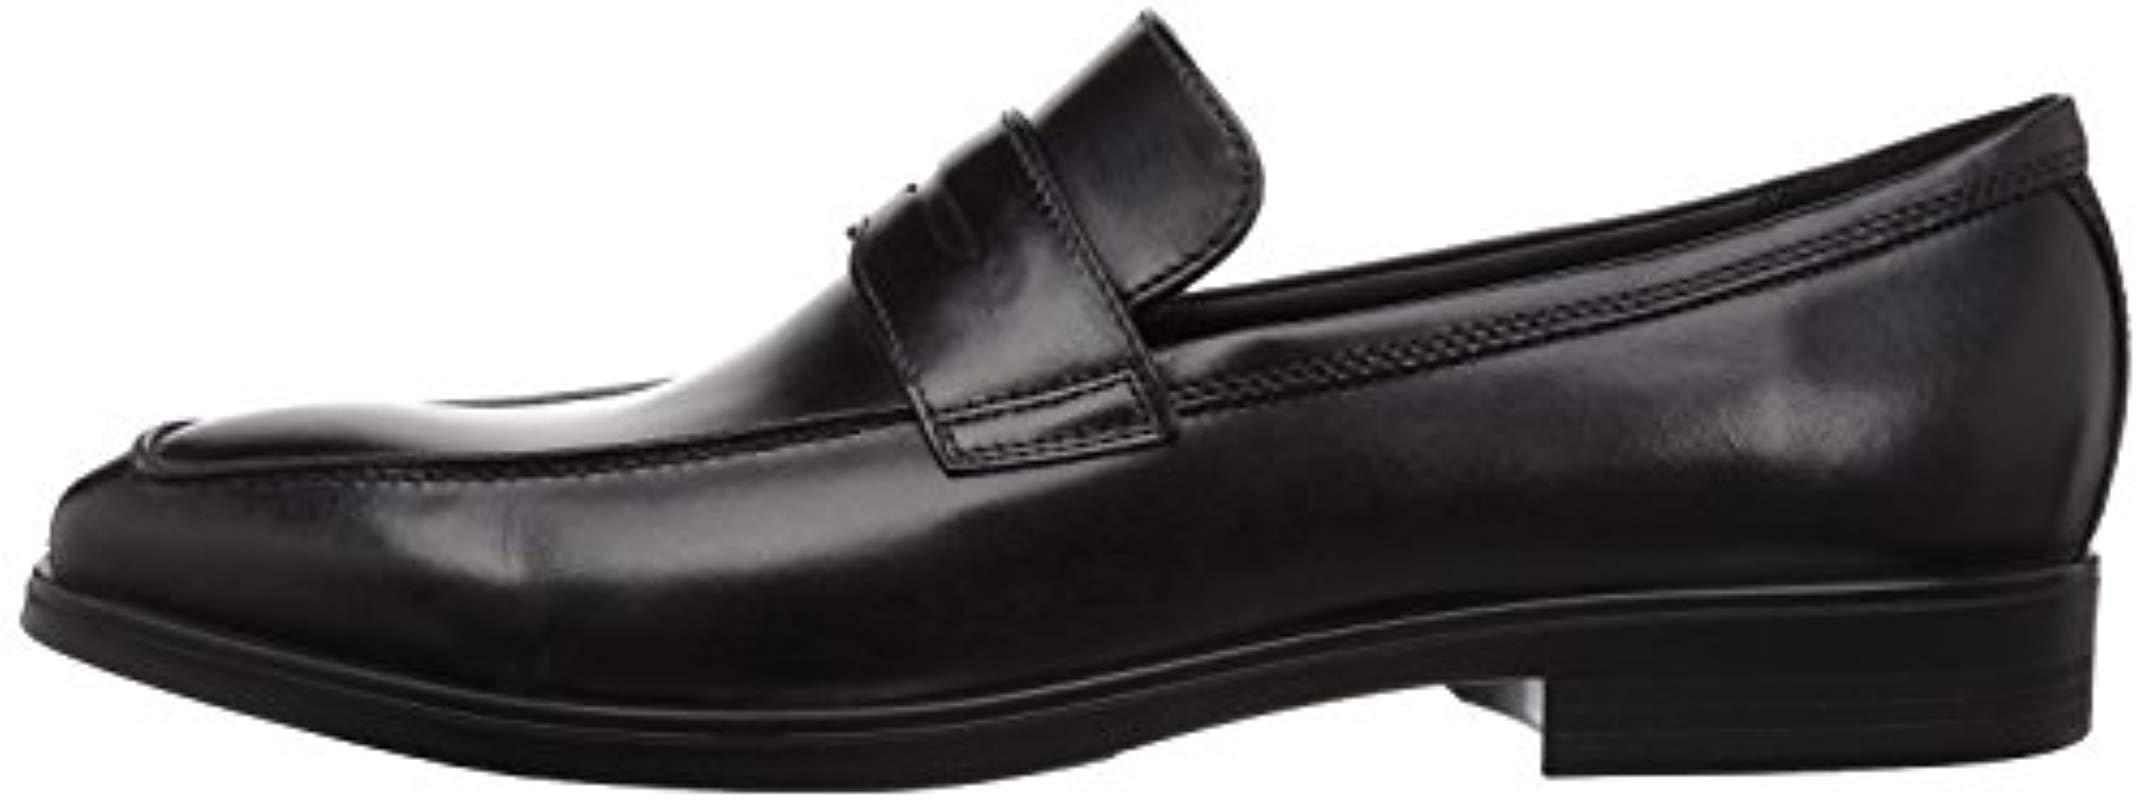 ecco loafers uk